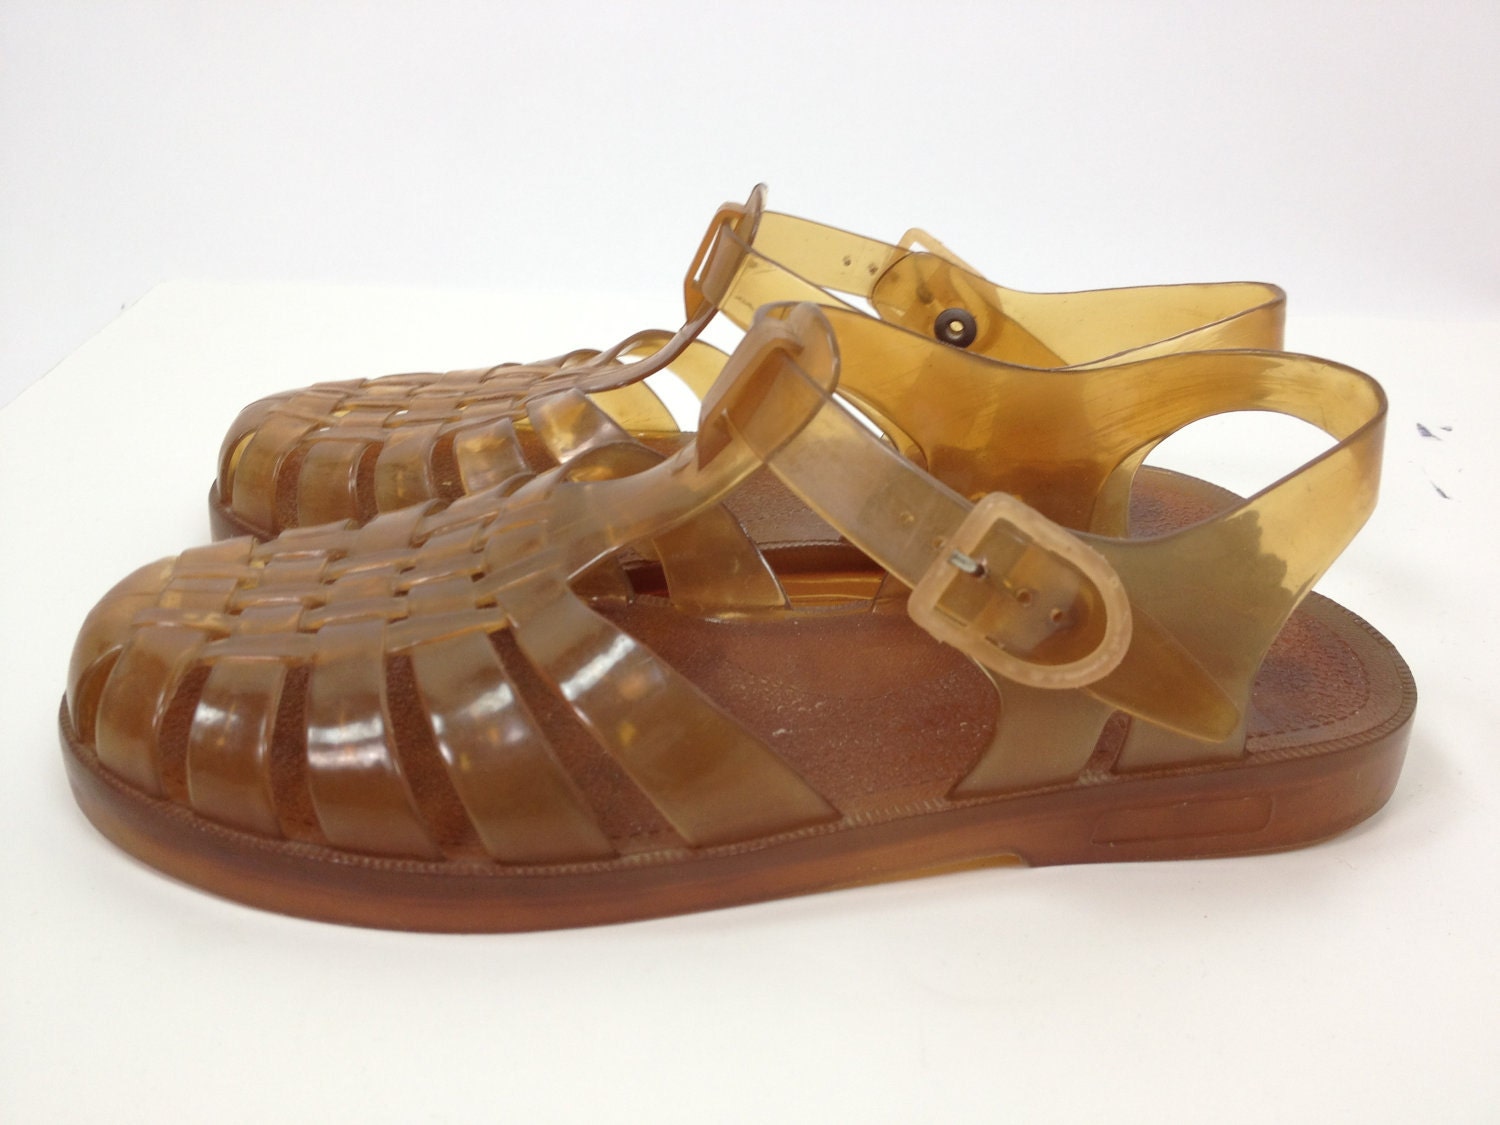 Vintage yellow Jelly Fisherman sandals. Classic T-Bar design.